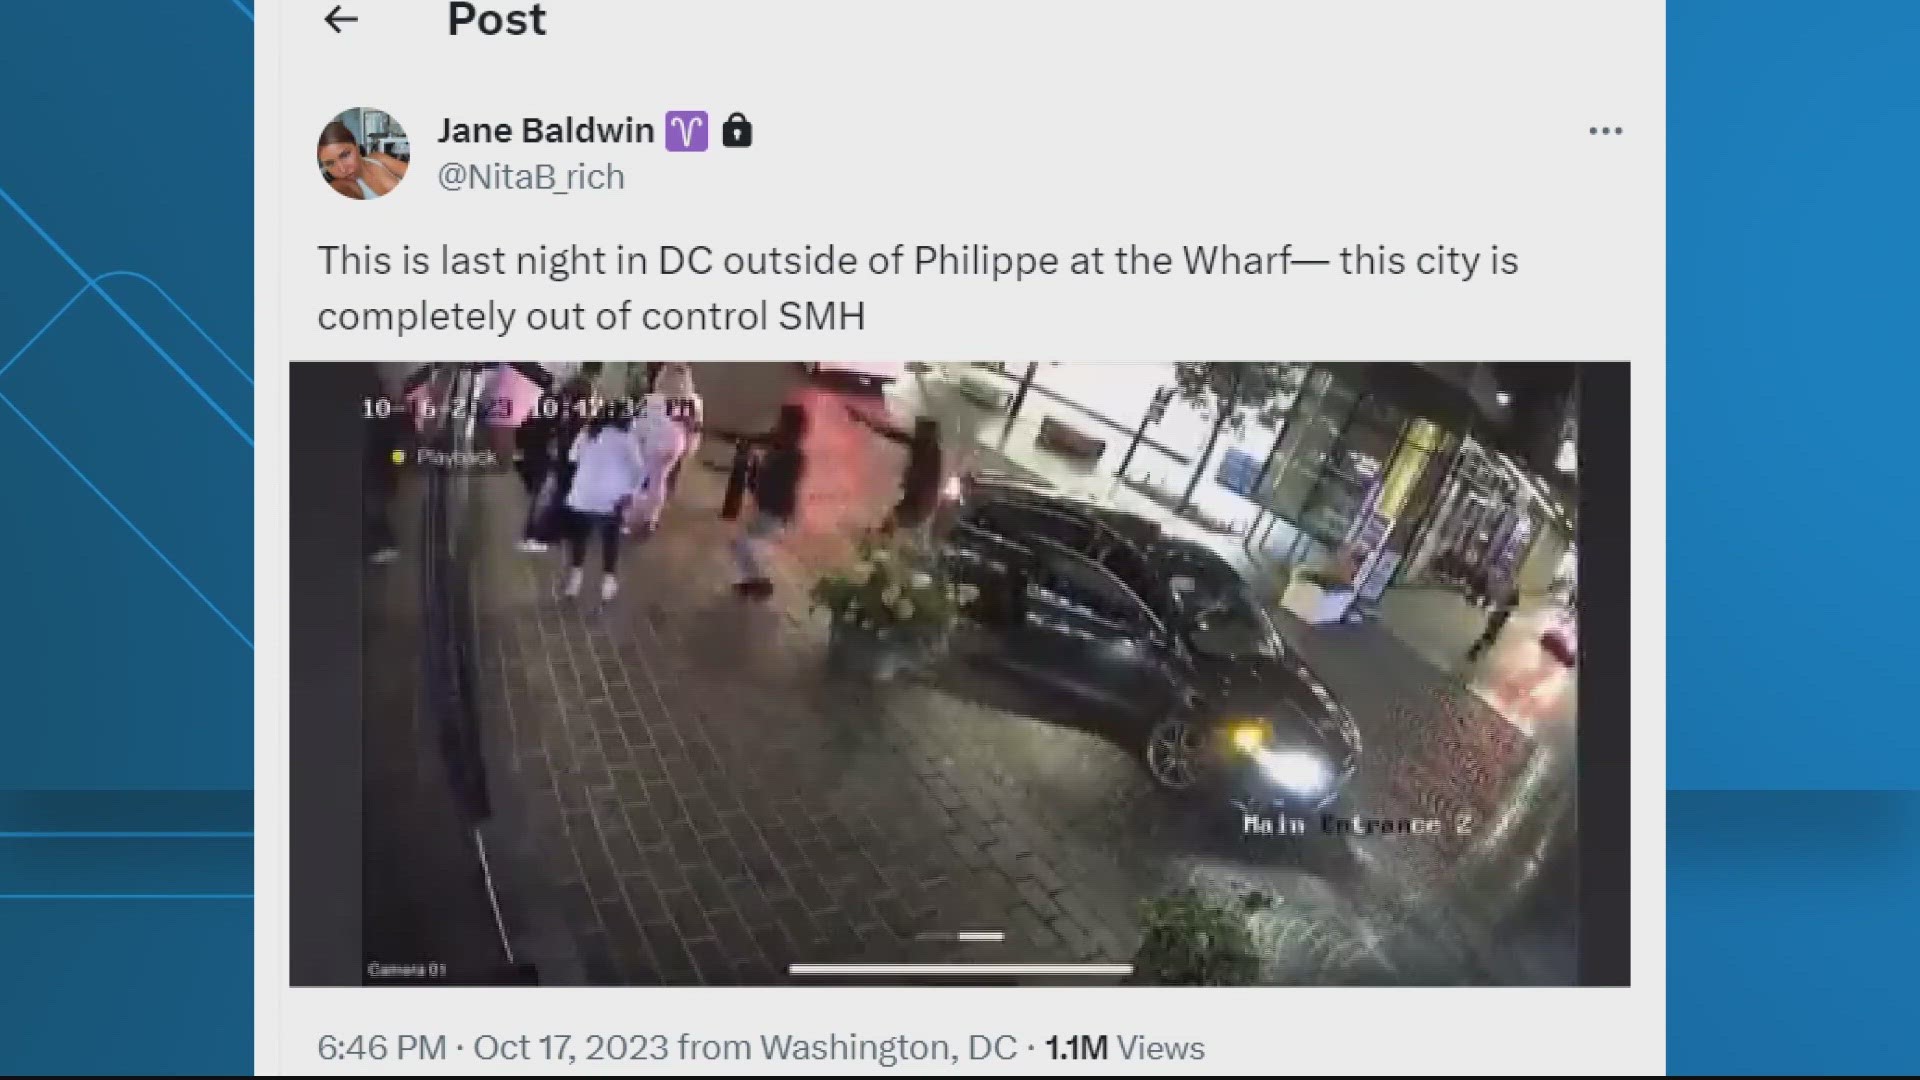 THE MOMENT THAT A GROUP OF ARMED MEN JUMP OUT OF A CAR AND ROB A GROUP OF PEOPLE MONDAY NIGHT AT THE WHARF IN SOUTHWEST D.C.